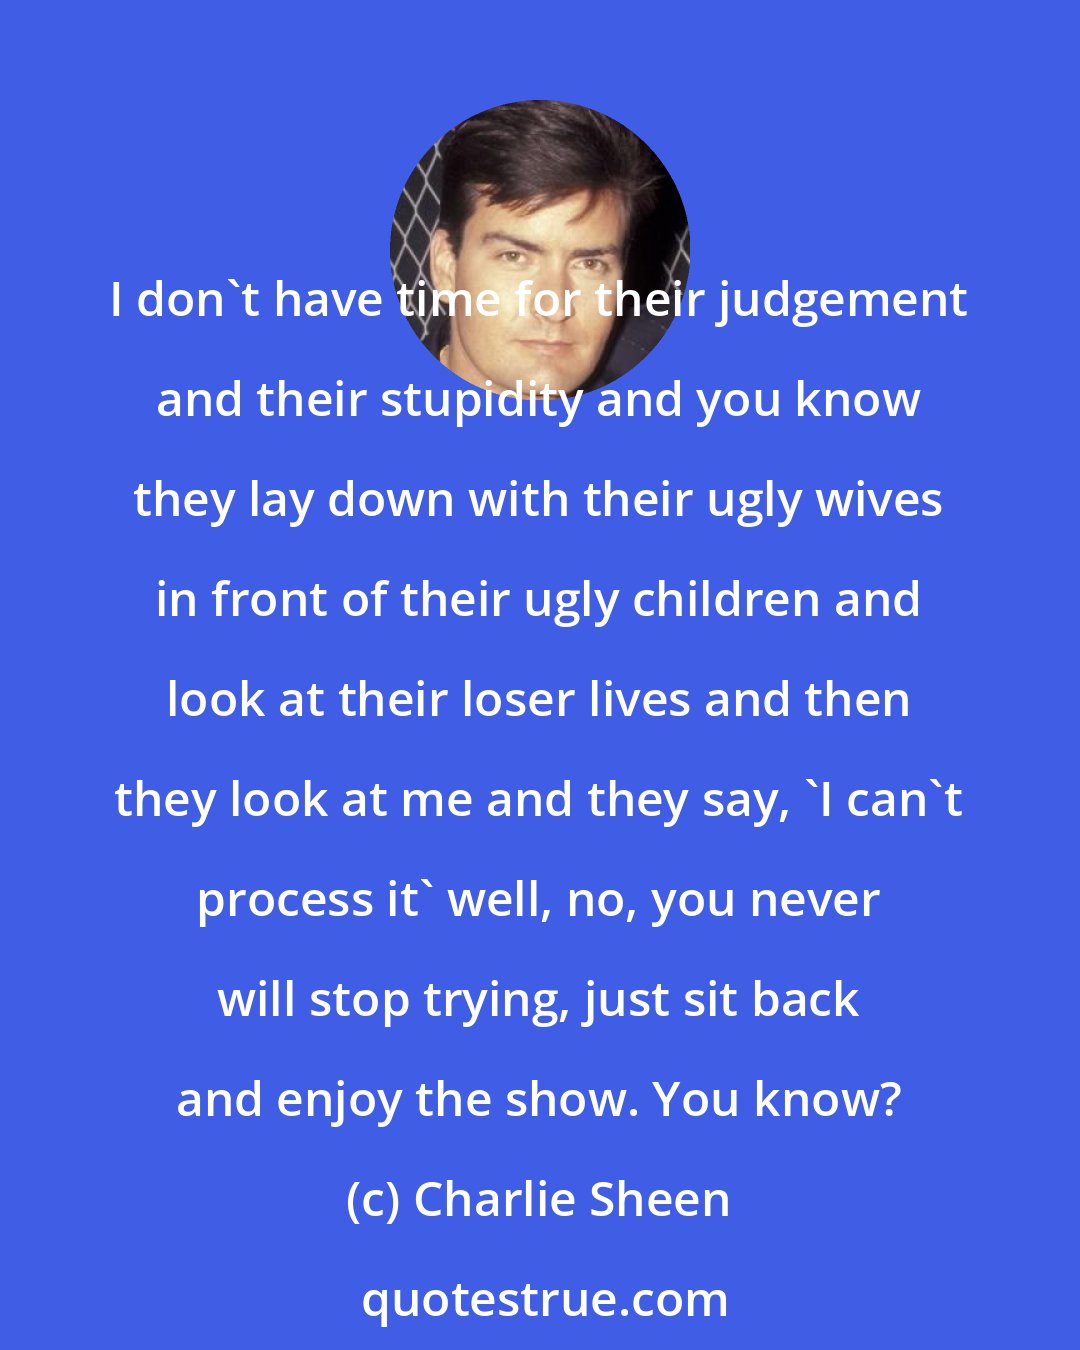 Charlie Sheen: I don't have time for their judgement and their stupidity and you know they lay down with their ugly wives in front of their ugly children and look at their loser lives and then they look at me and they say, 'I can't process it' well, no, you never will stop trying, just sit back and enjoy the show. You know?